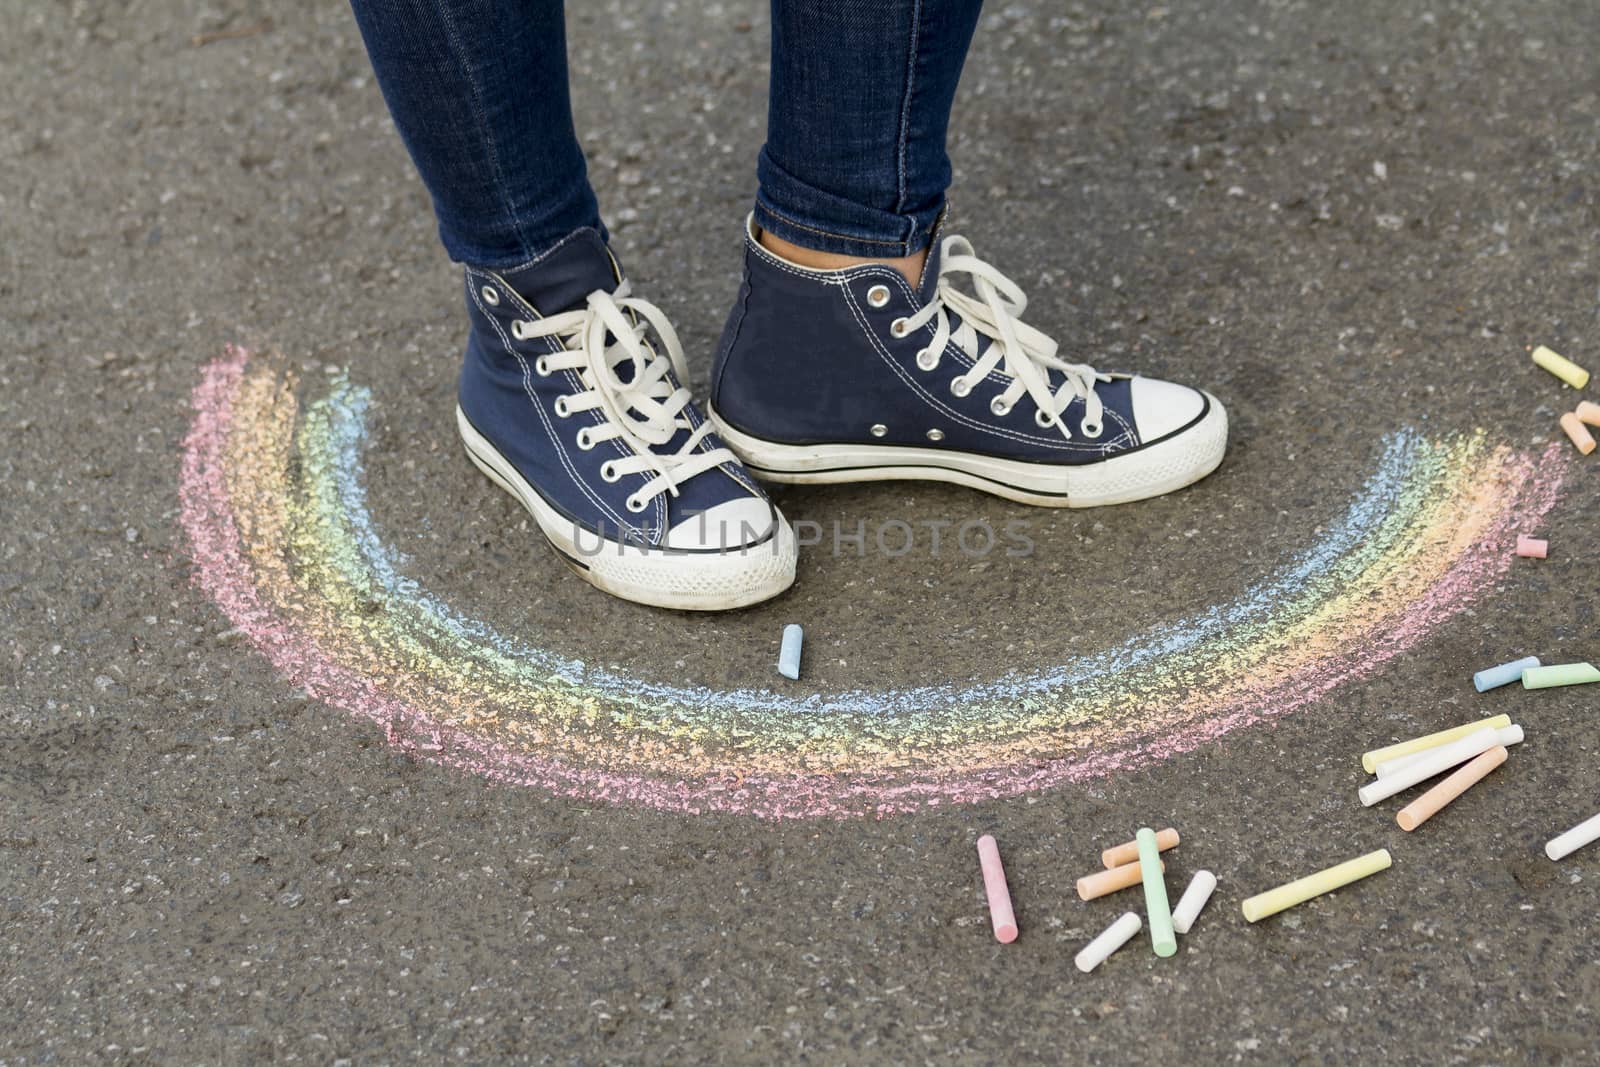 Feet in sneakers are on the pavement next to the picture of the Rainbow